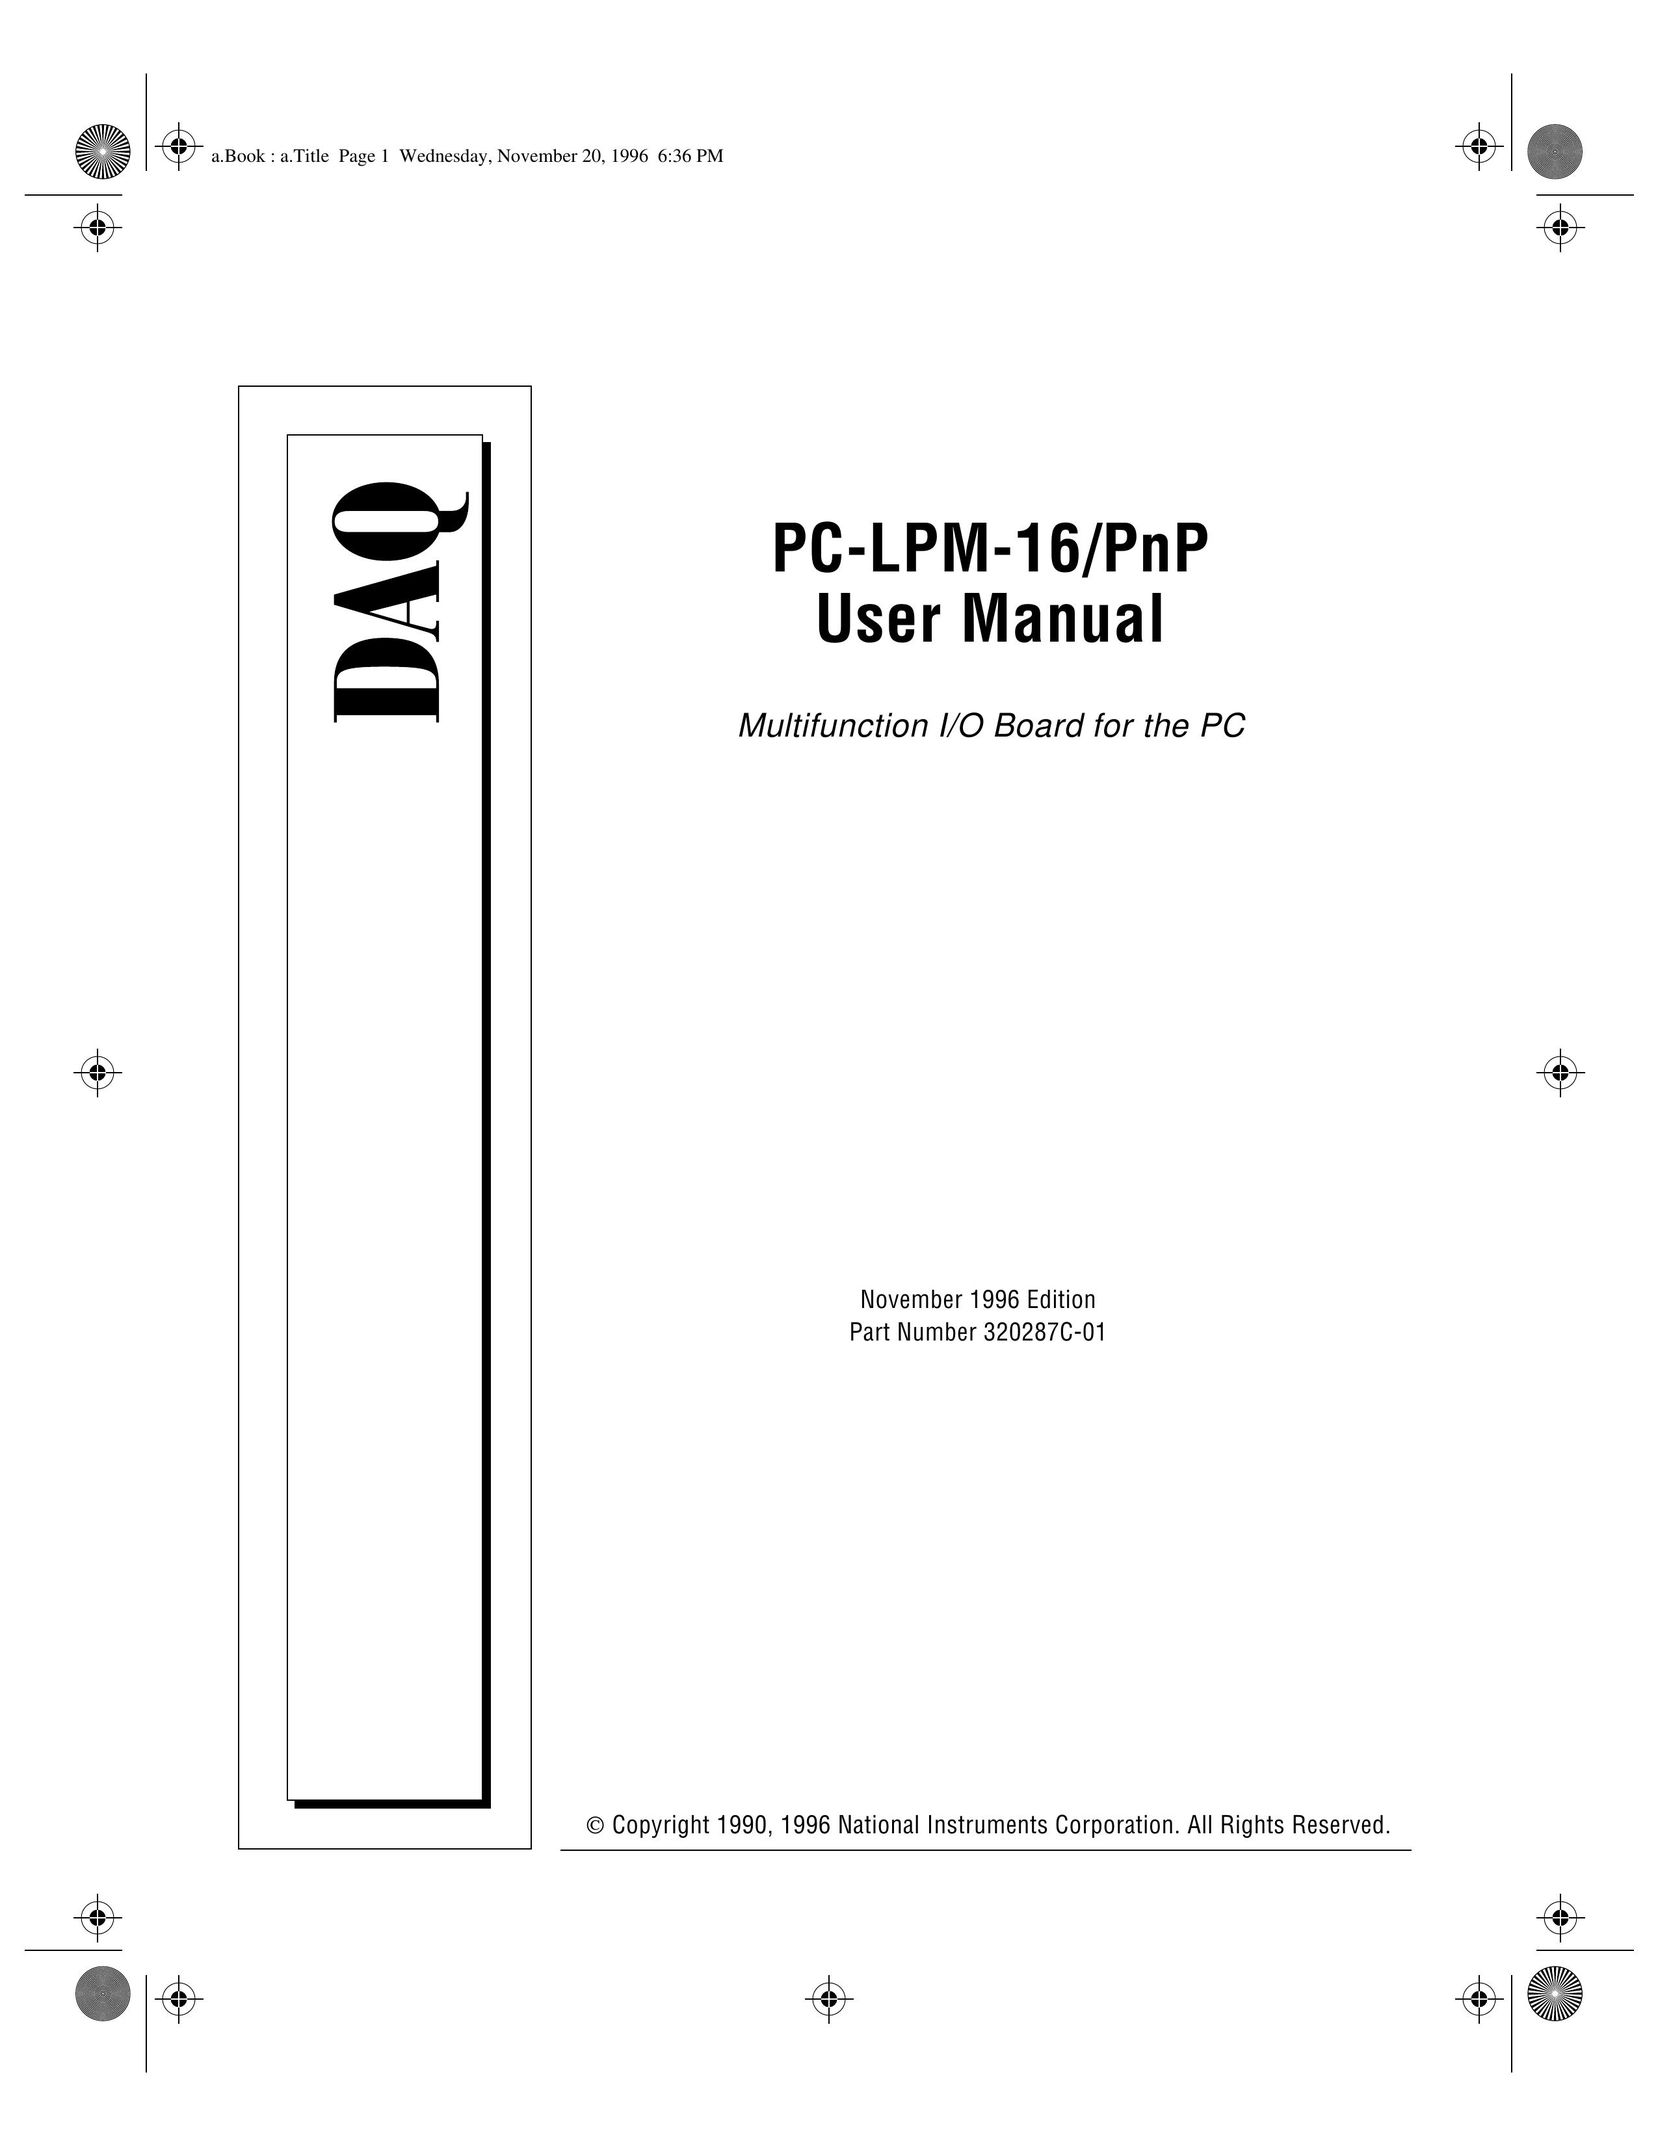 National Instruments PC-LPM-16/PnP Switch User Manual